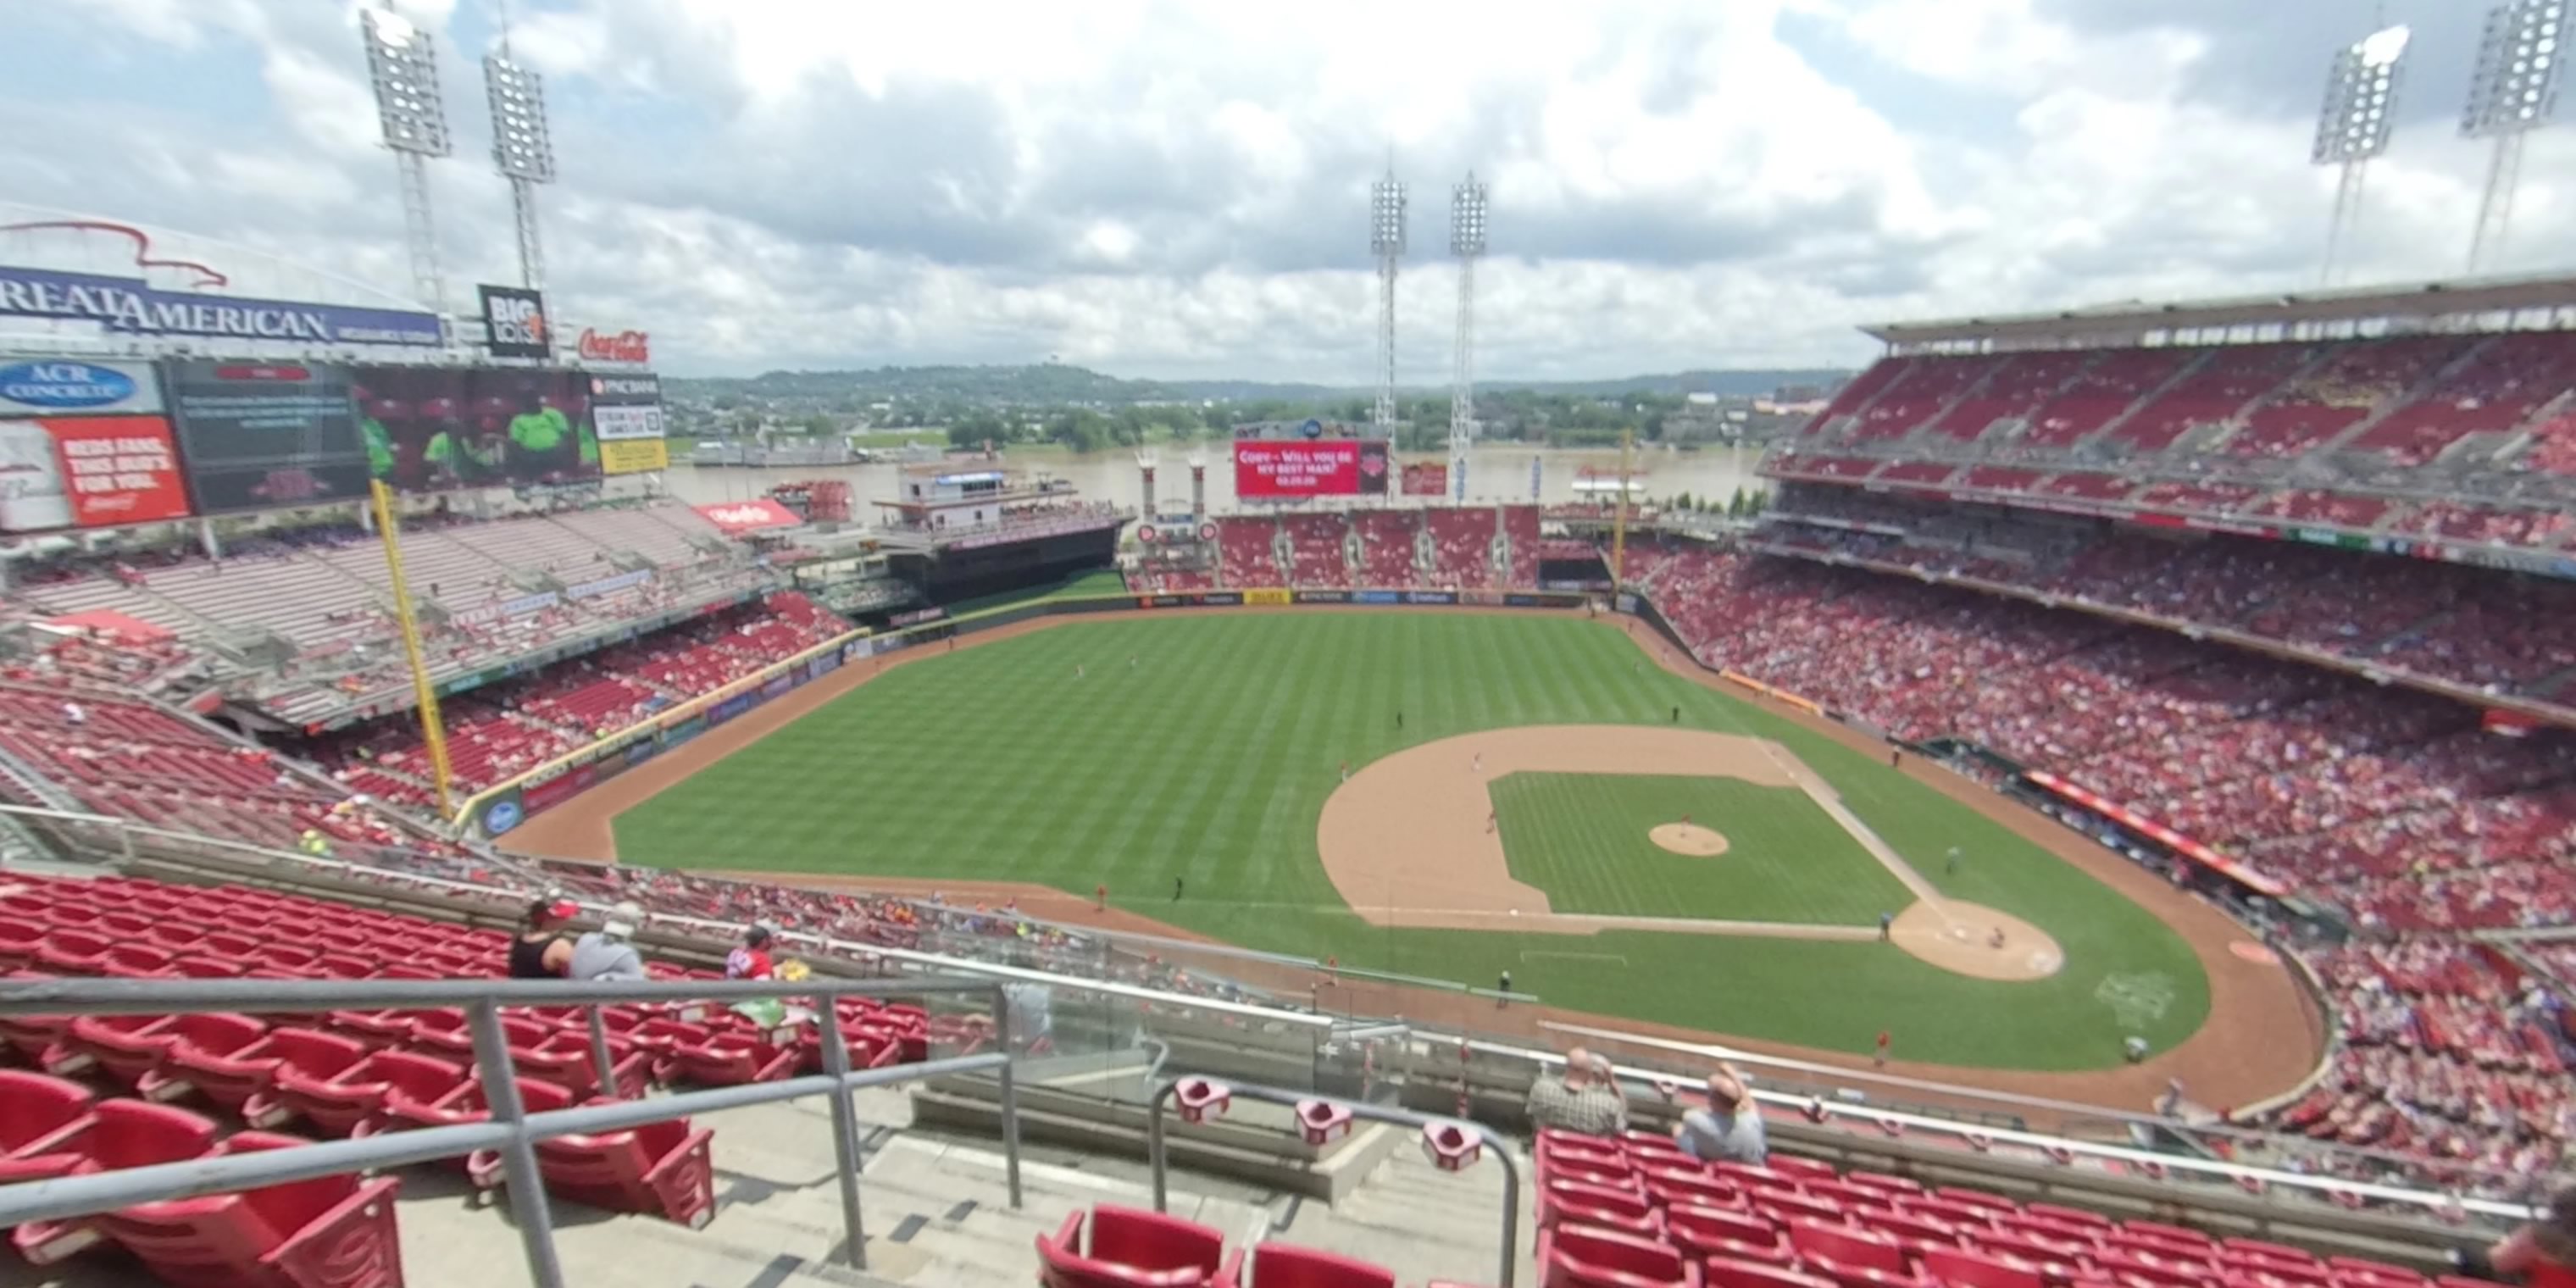 Section 517 at Great American Ball Park 